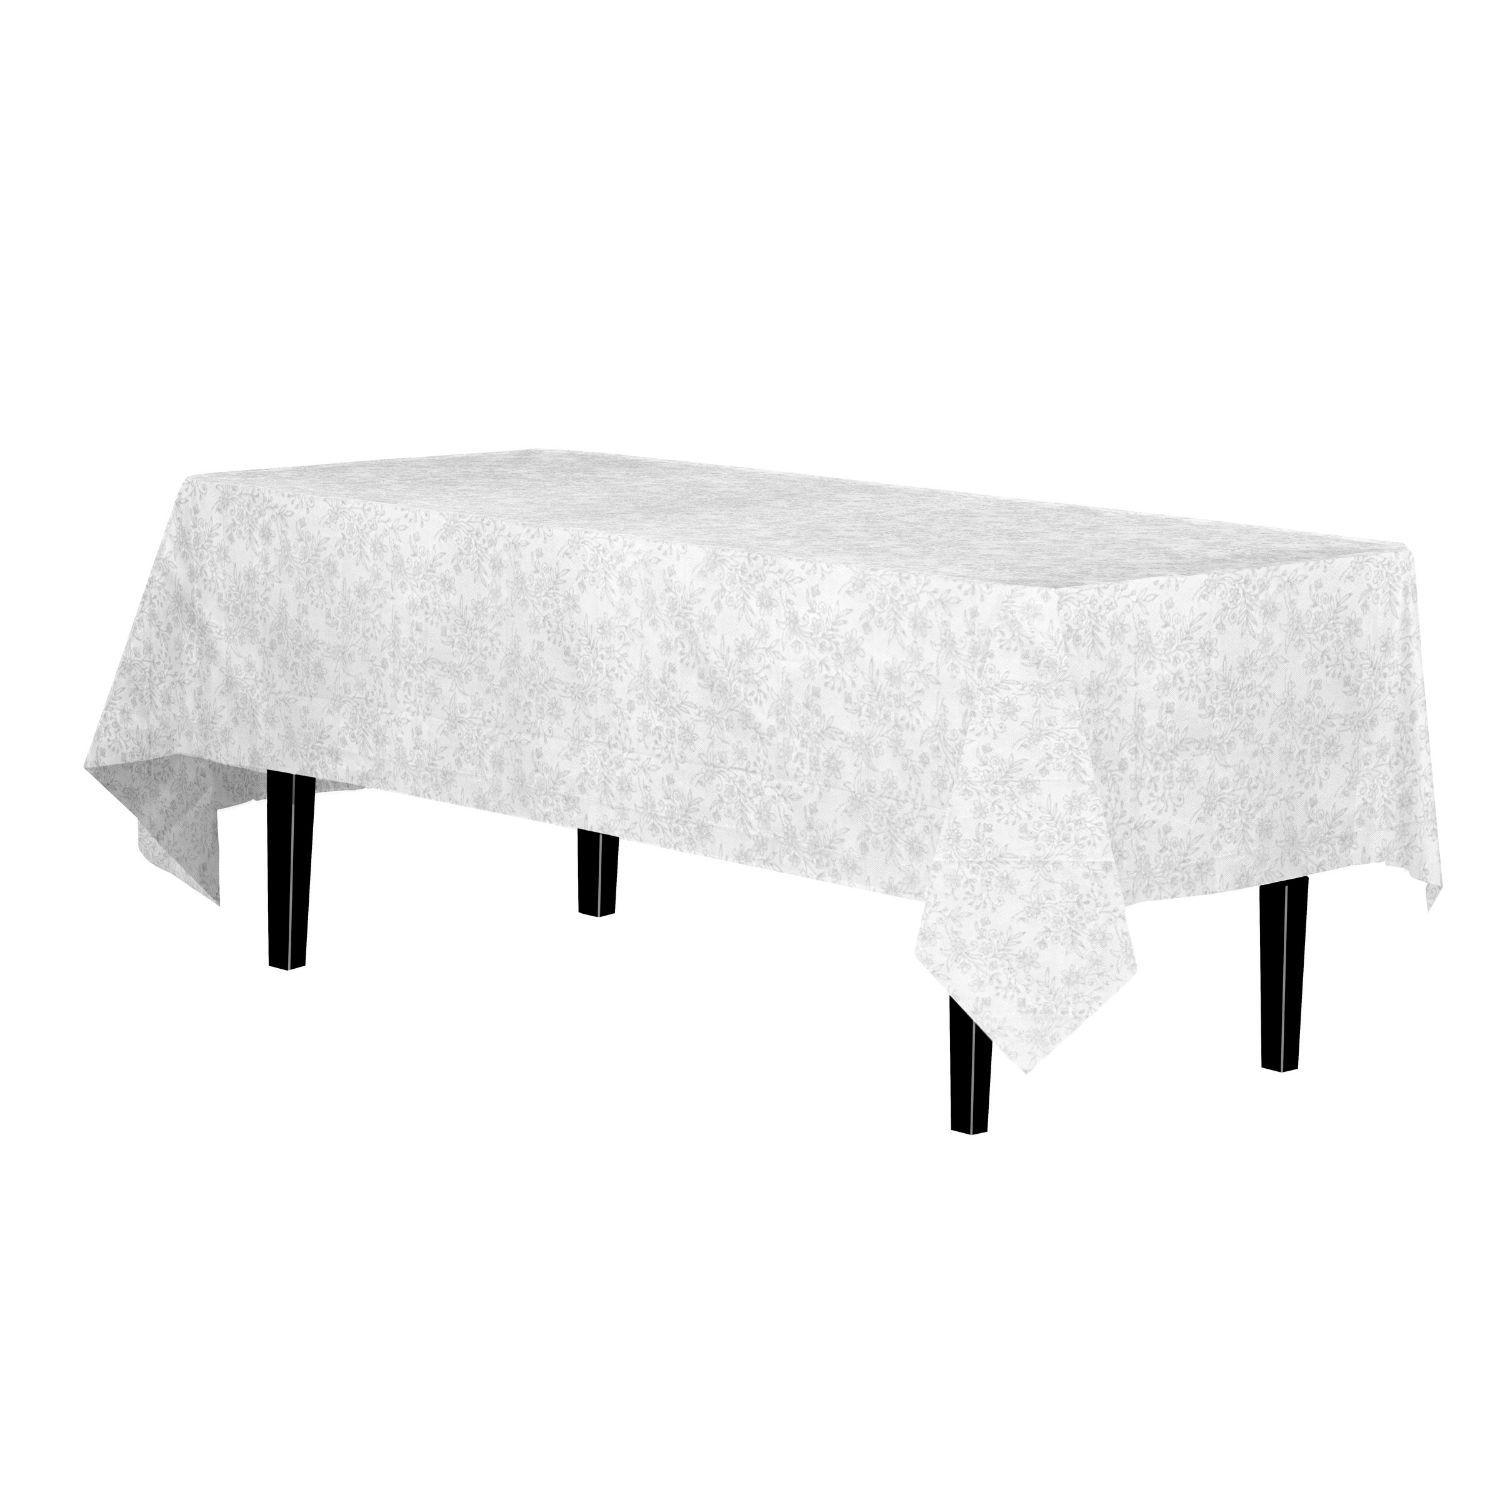 54in. x 108in. Printed Plastic Table cover White Floral - 48 ct.